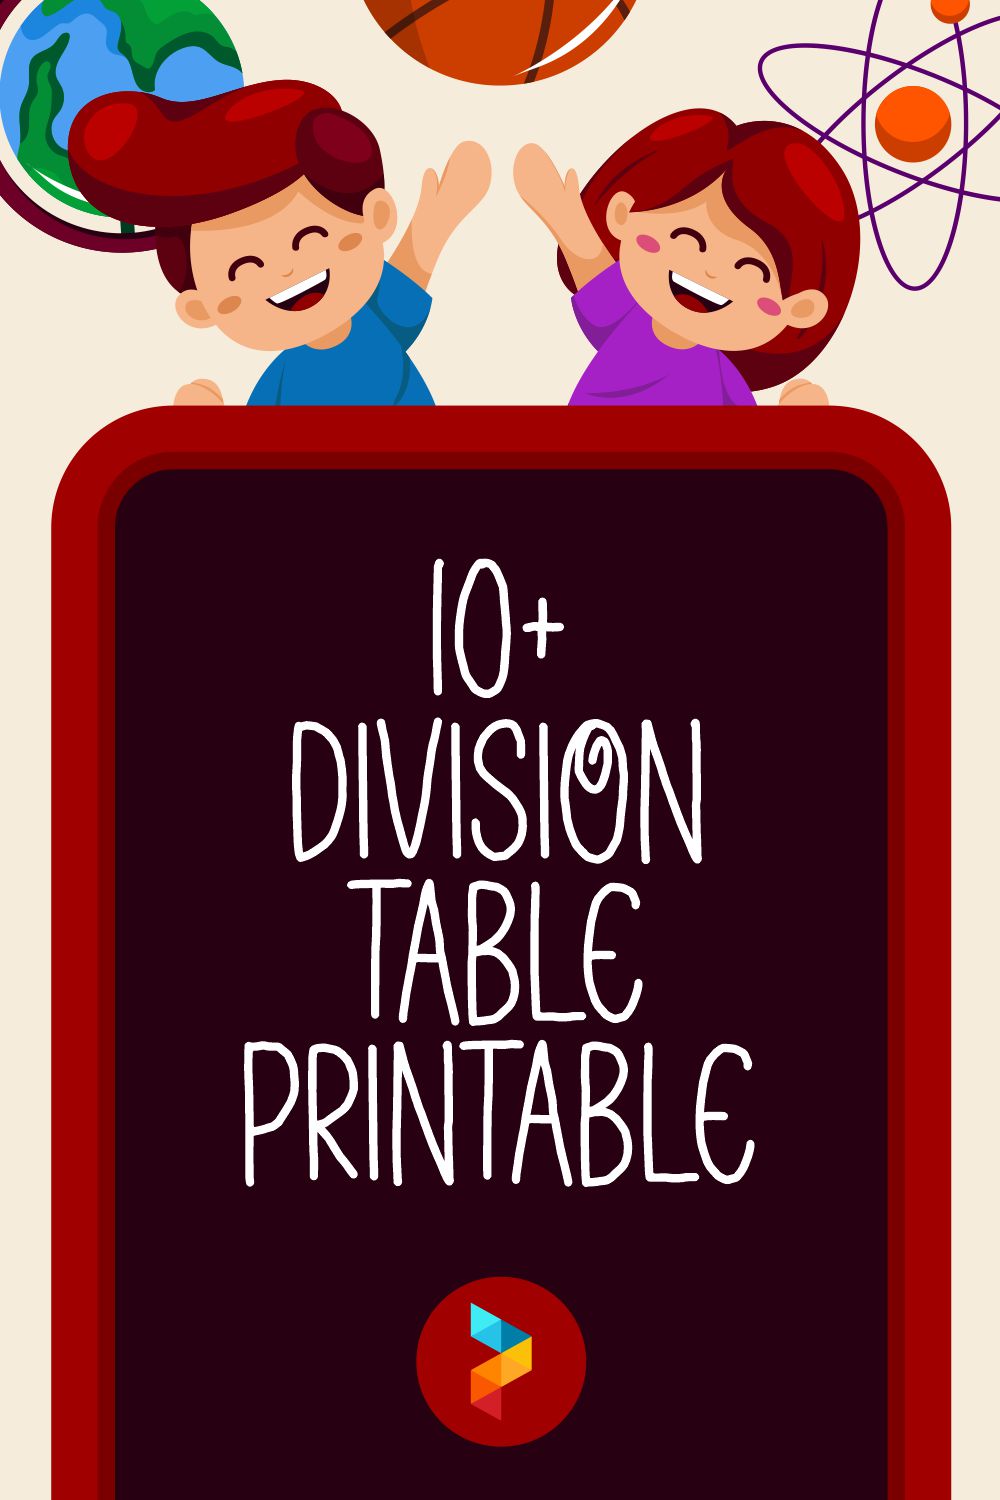 Division Table Printable